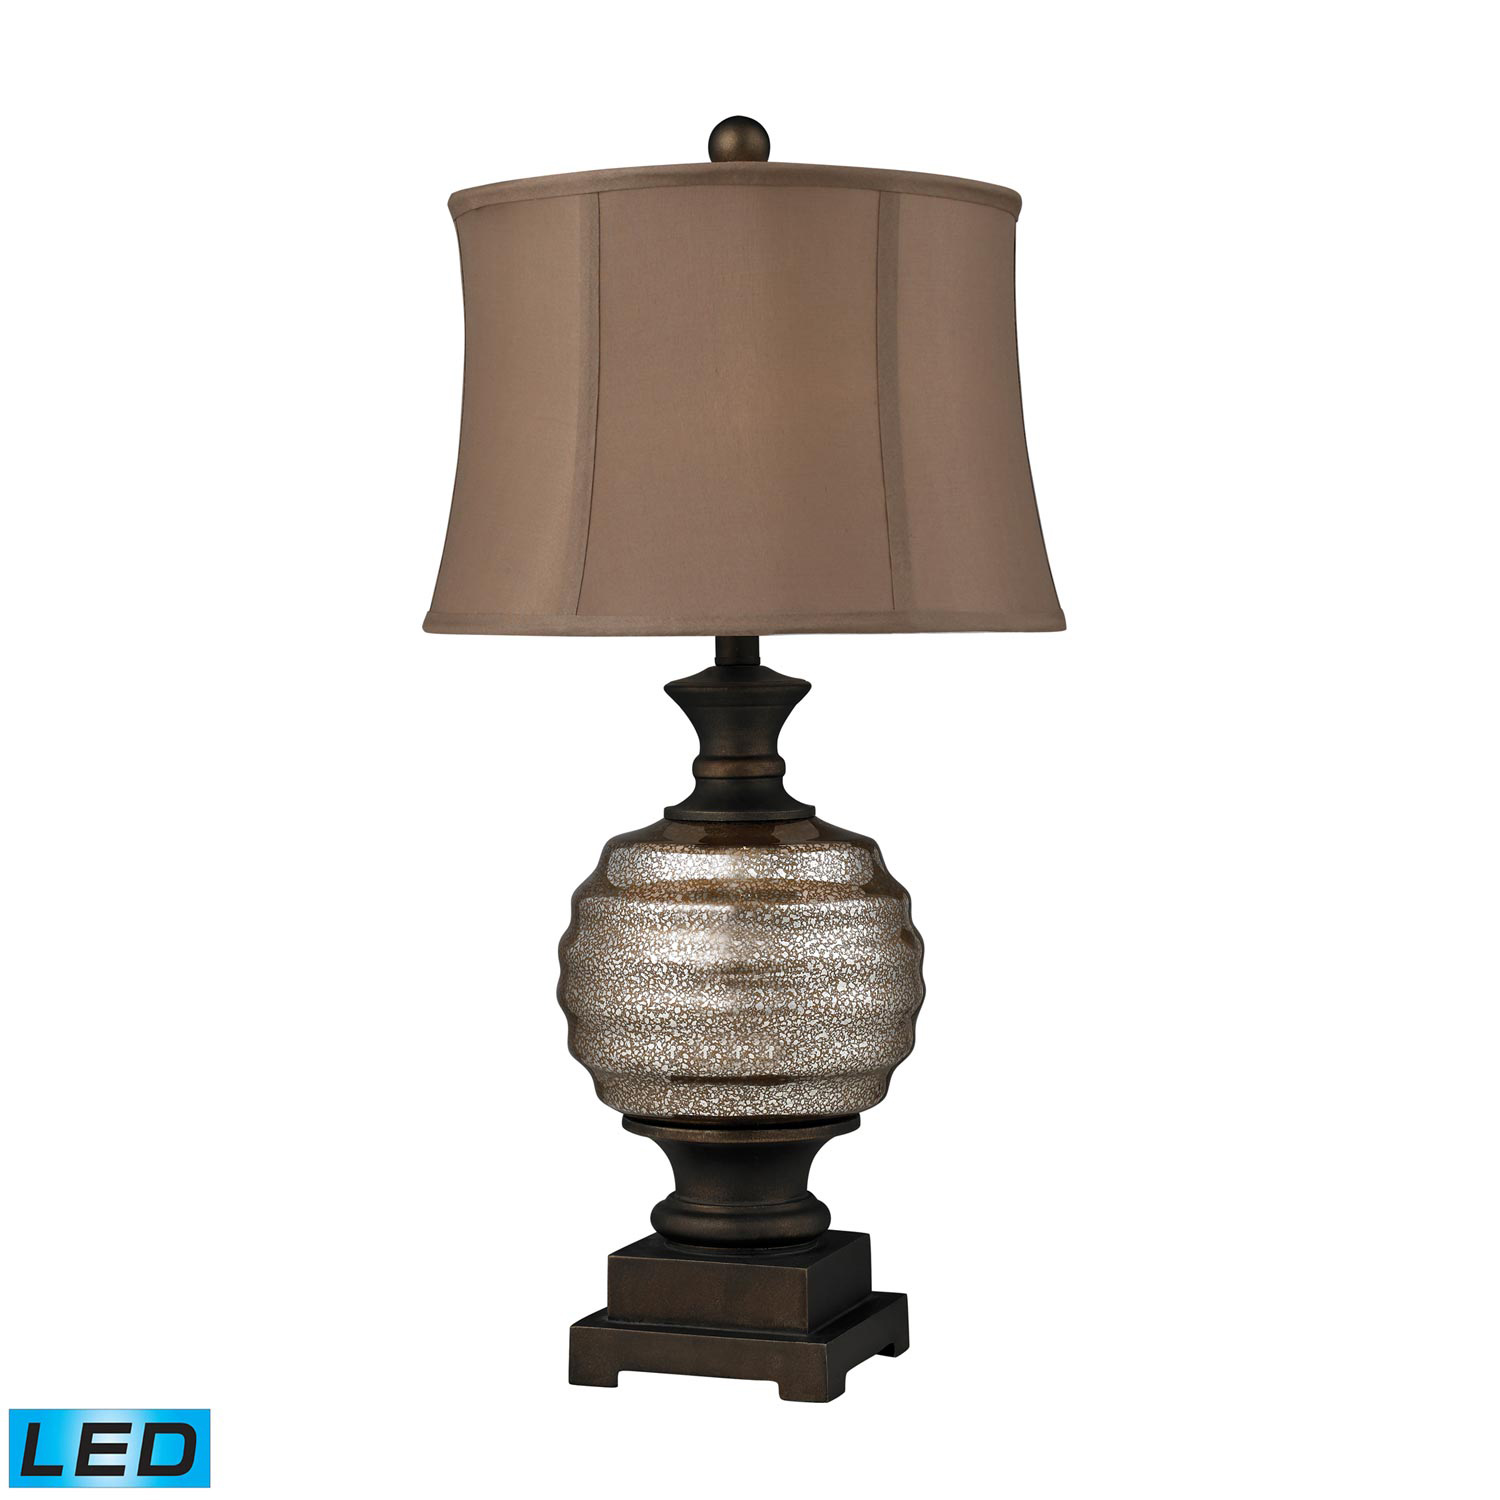 Elk Lighting D2308-LED Grants Pass Table Lamp - Antique Mercury Glass and Bronze Accents